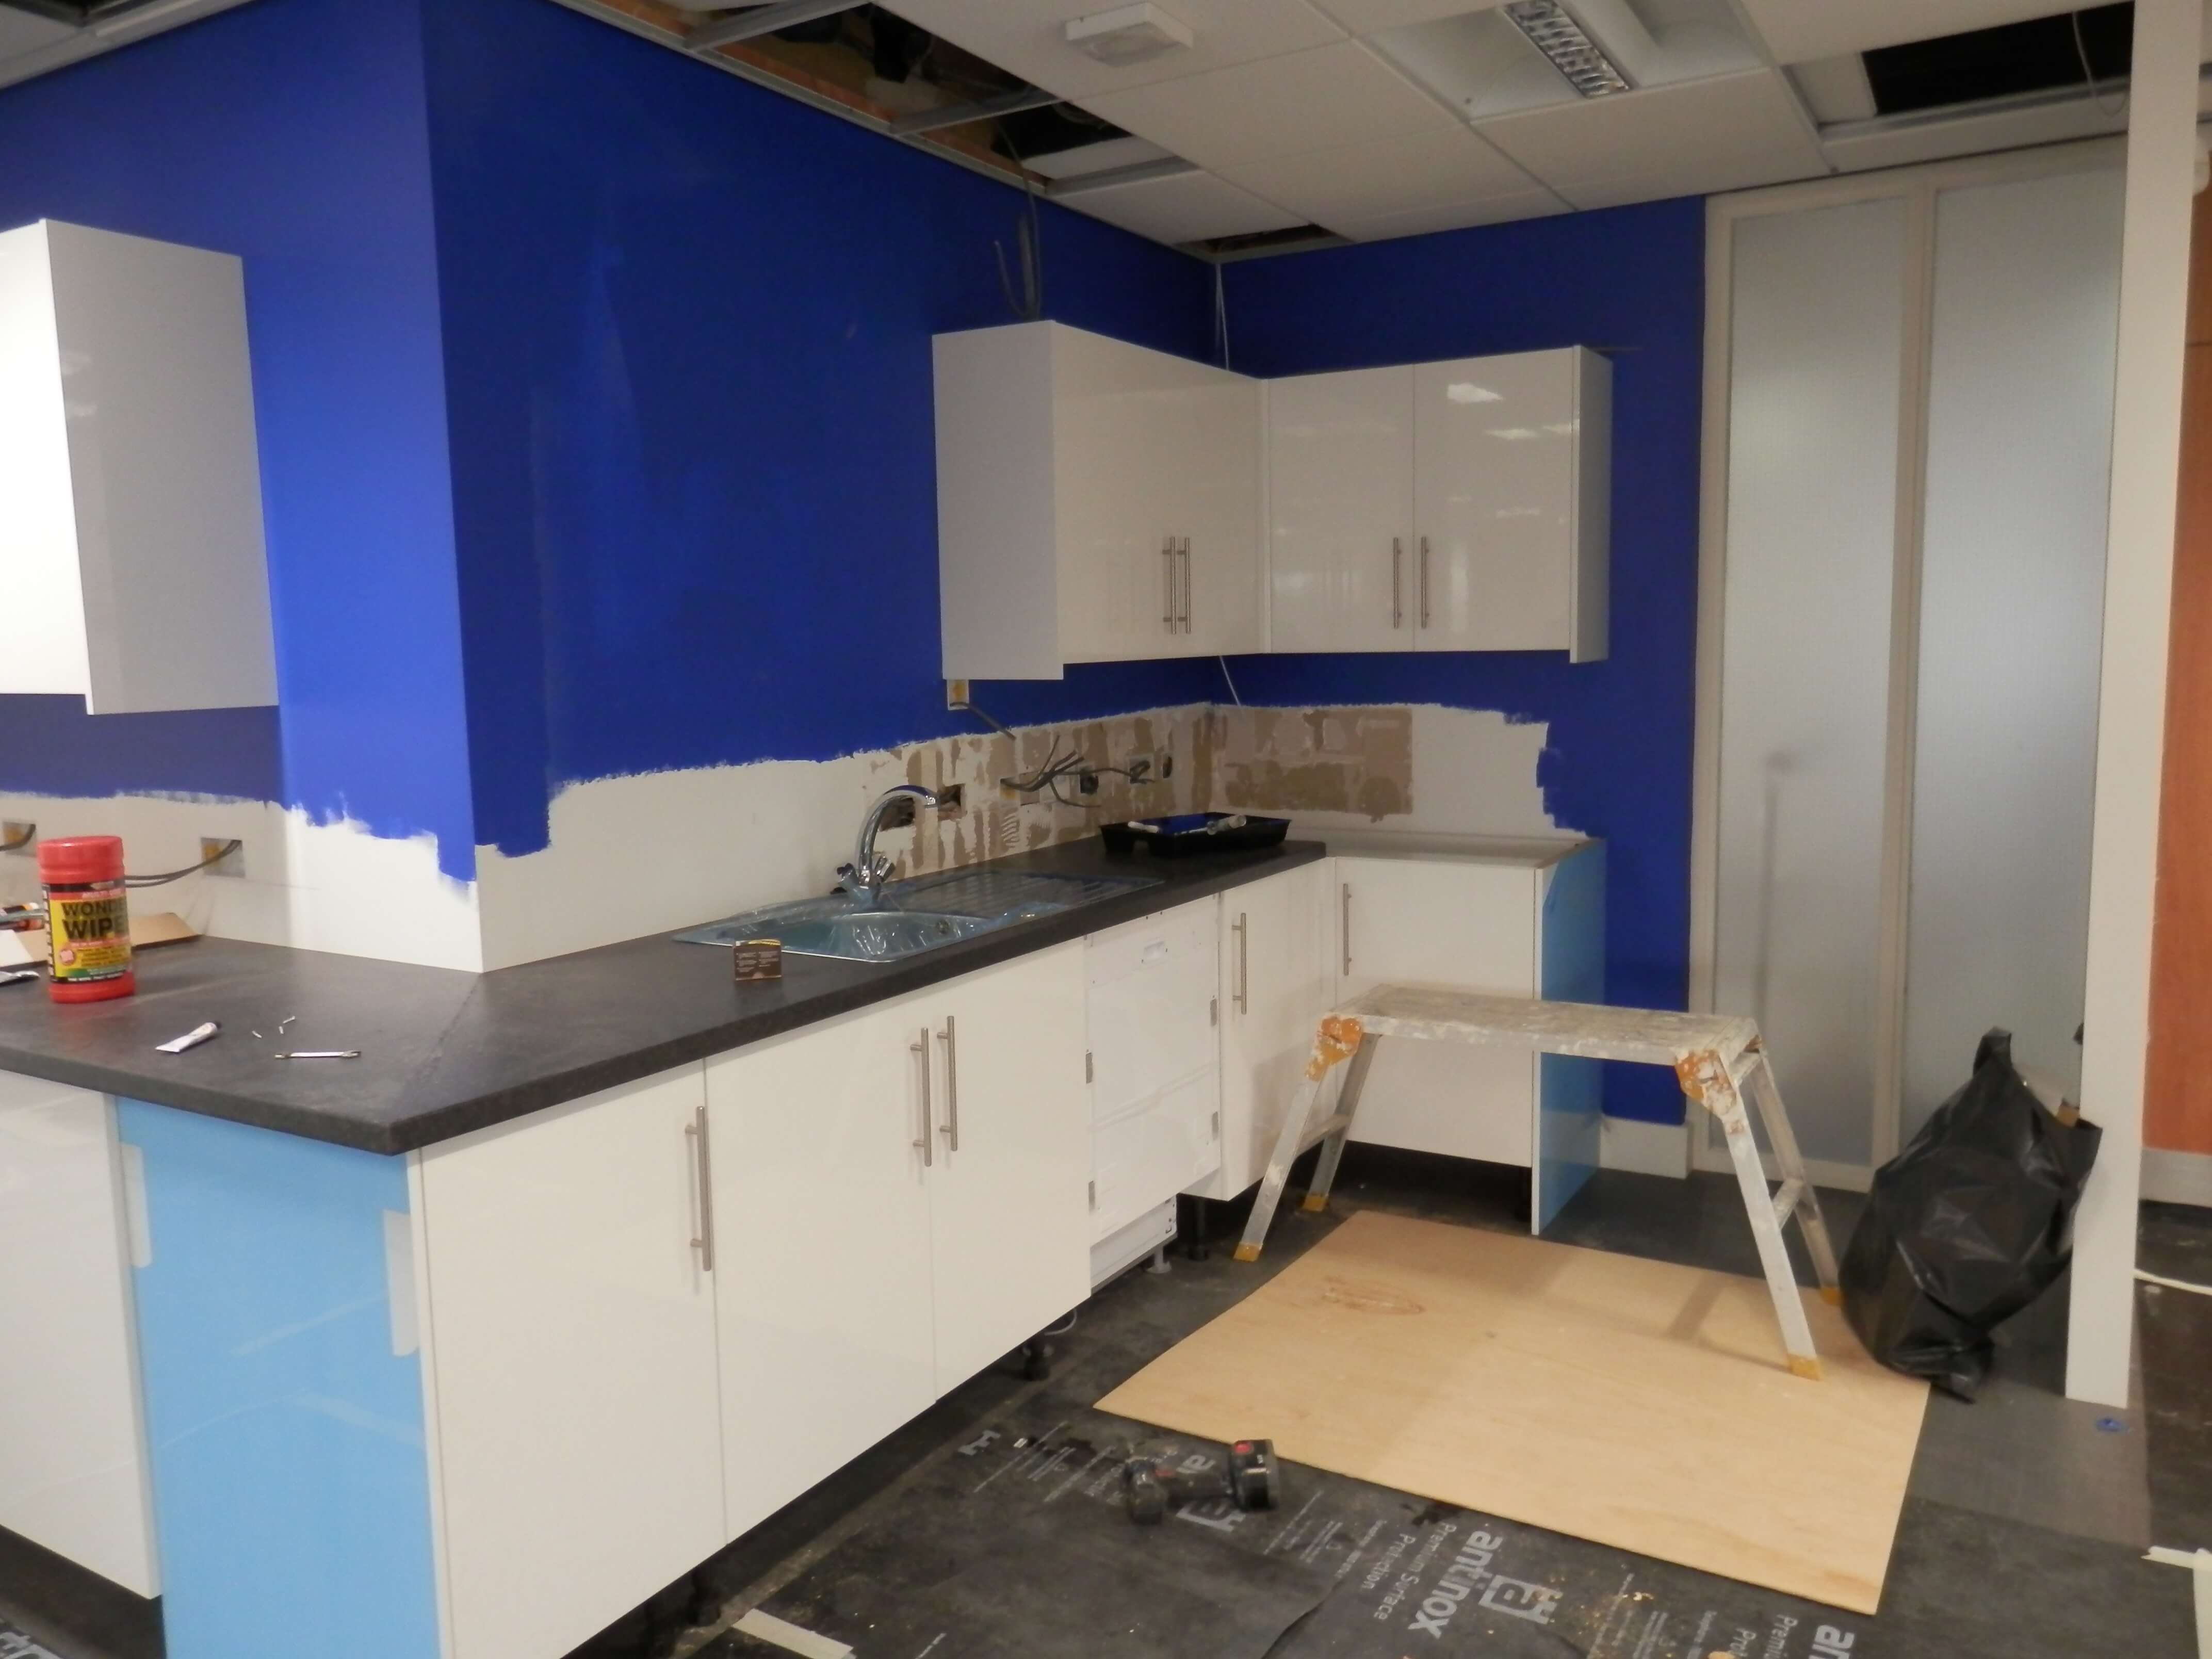 Kitchen taking shape, worktops fitted and walls painted.